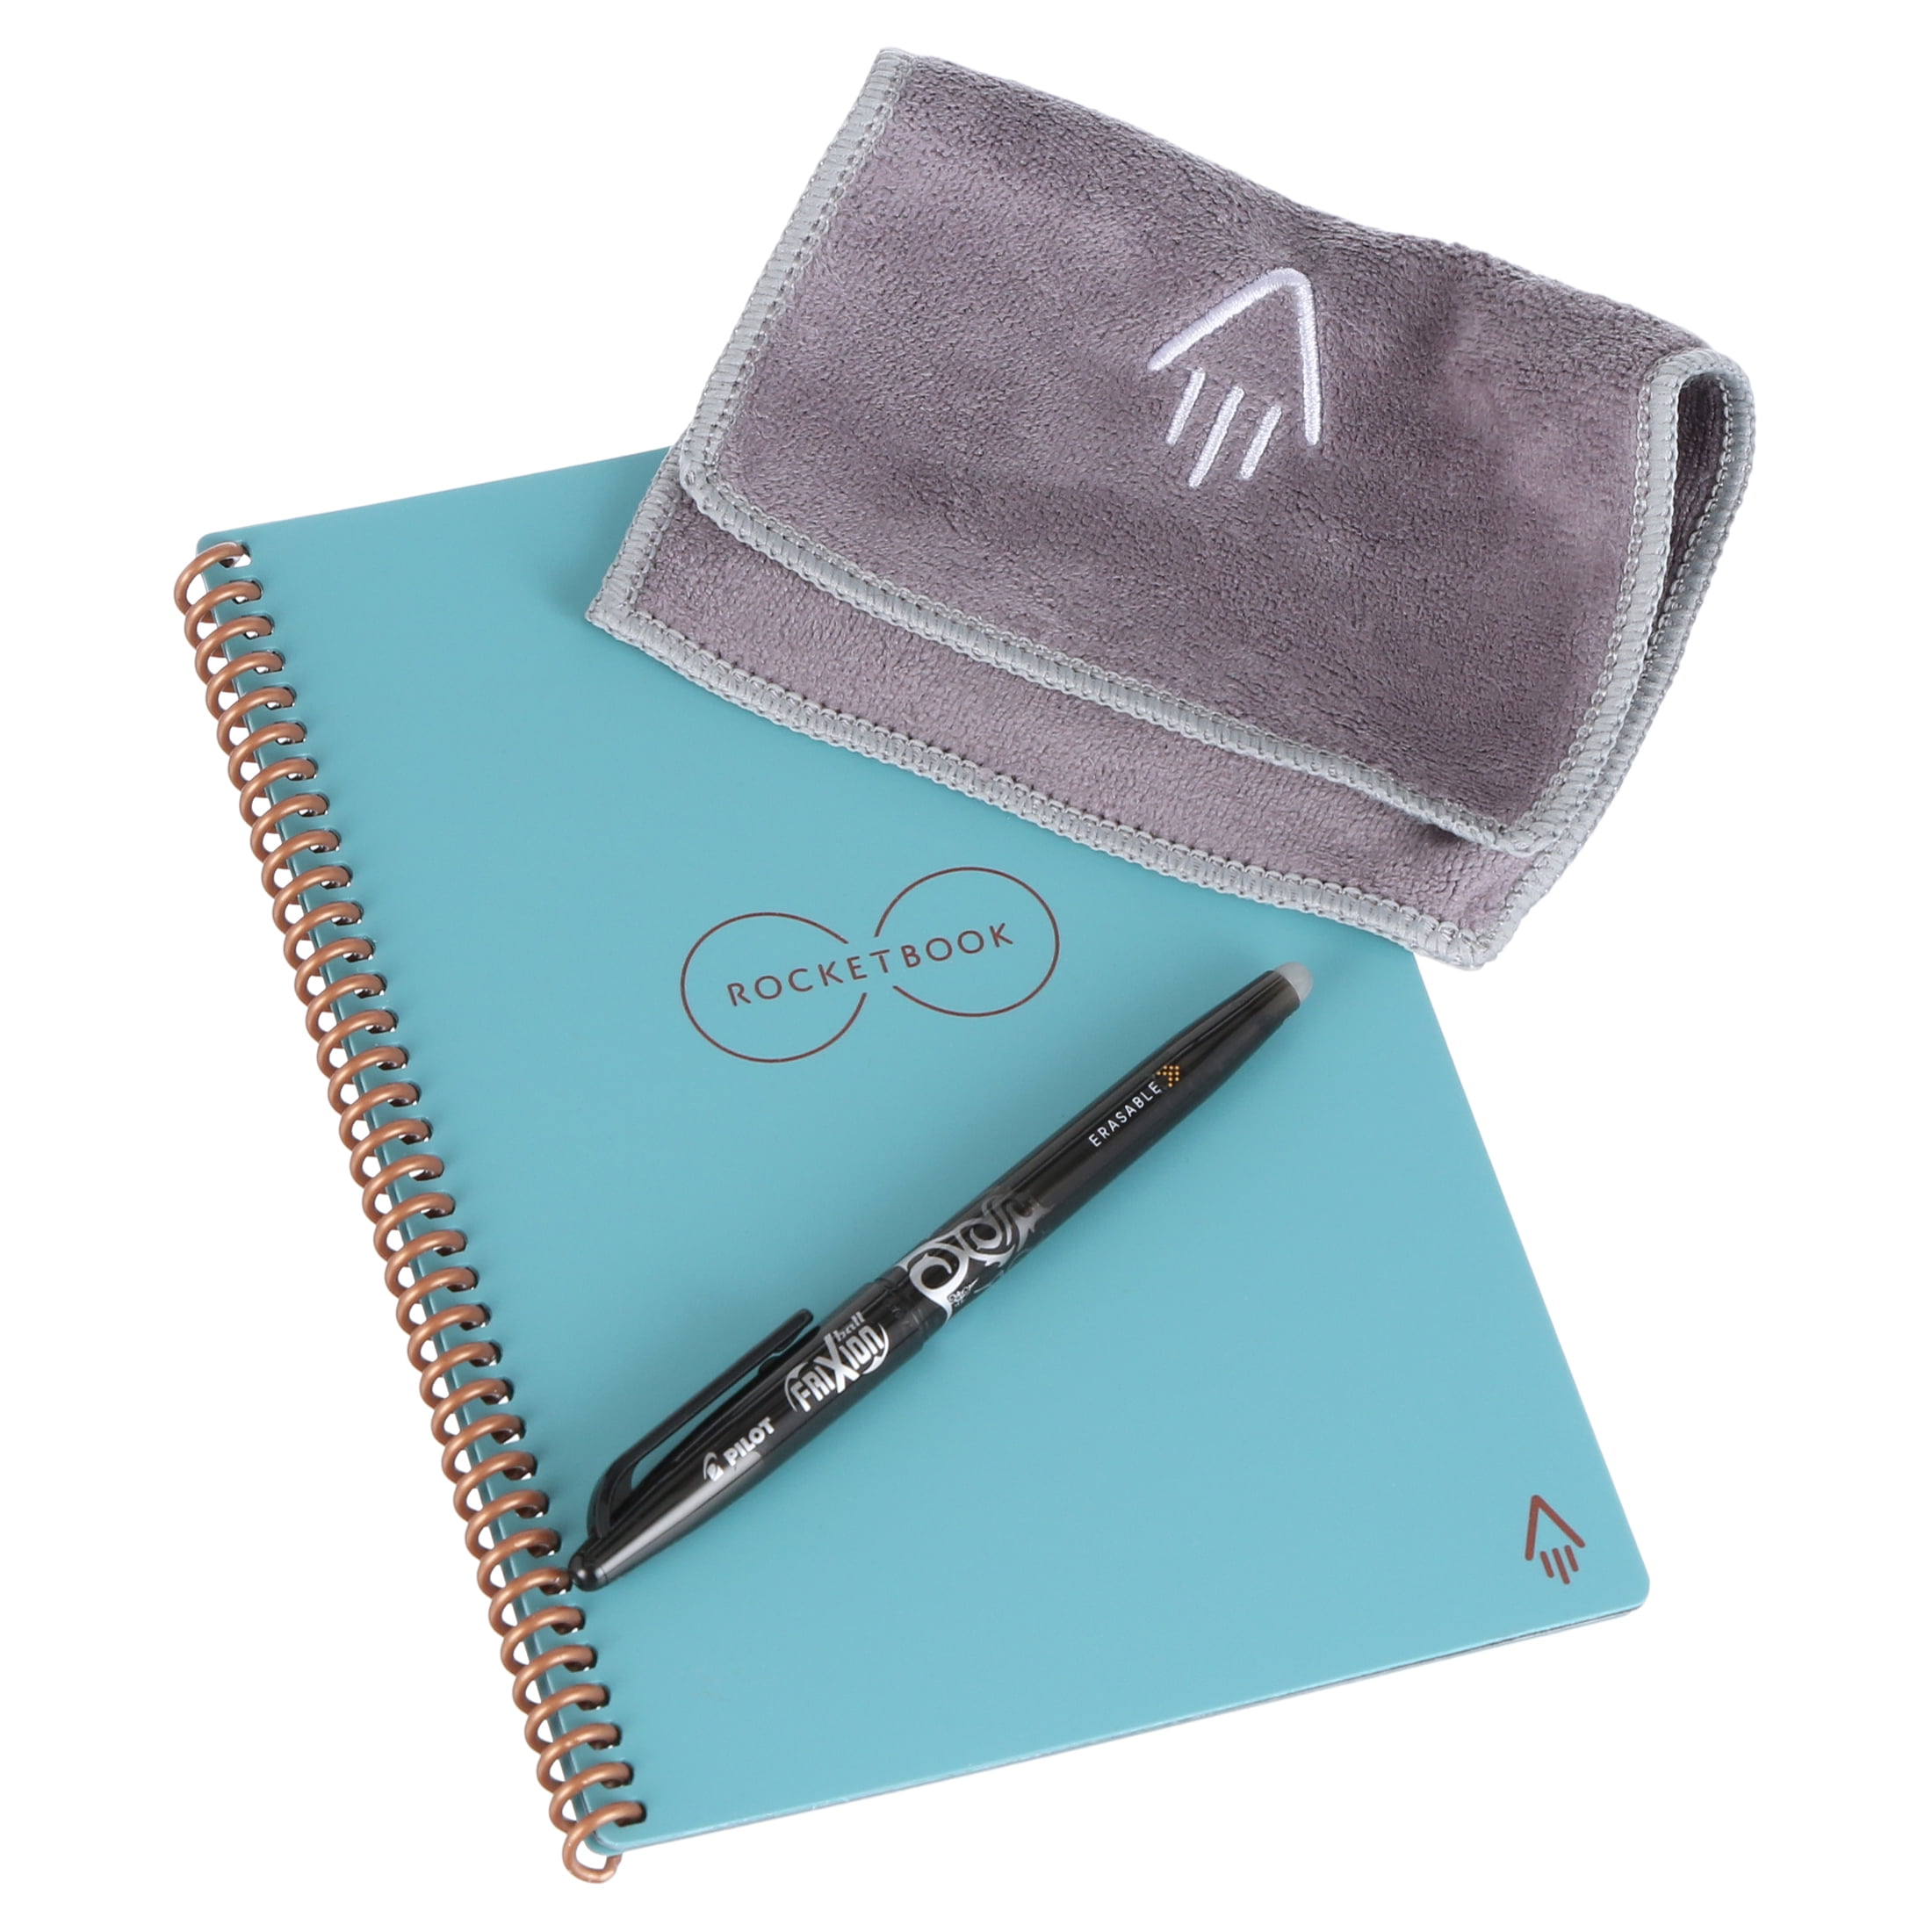 Executive Size Dot-Grid Eco-Friendly Notebook with 1 Pilot Frixion Pen & 1 Microfiber Cloth Included Scarlet Sky Cover Rocketbook Smart Reusable Notebook 6 x 8.8 